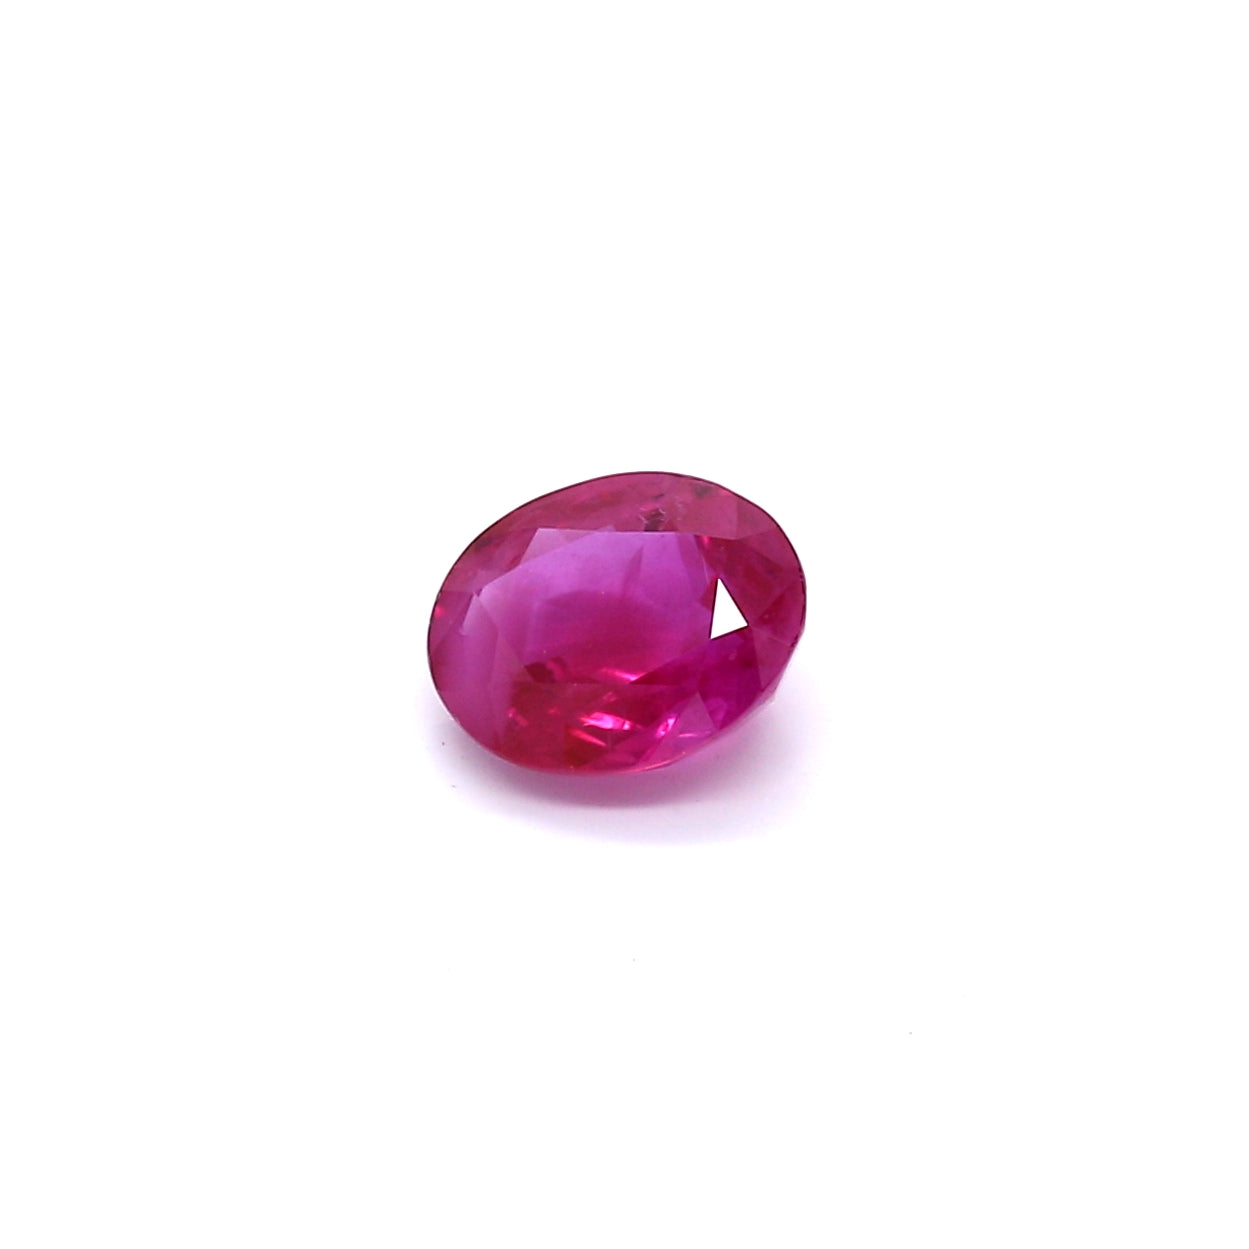 1.19ct Pinkish Red, Oval Ruby, H(a), Myanmar - 6.83 x 5.49 x 3.52mm